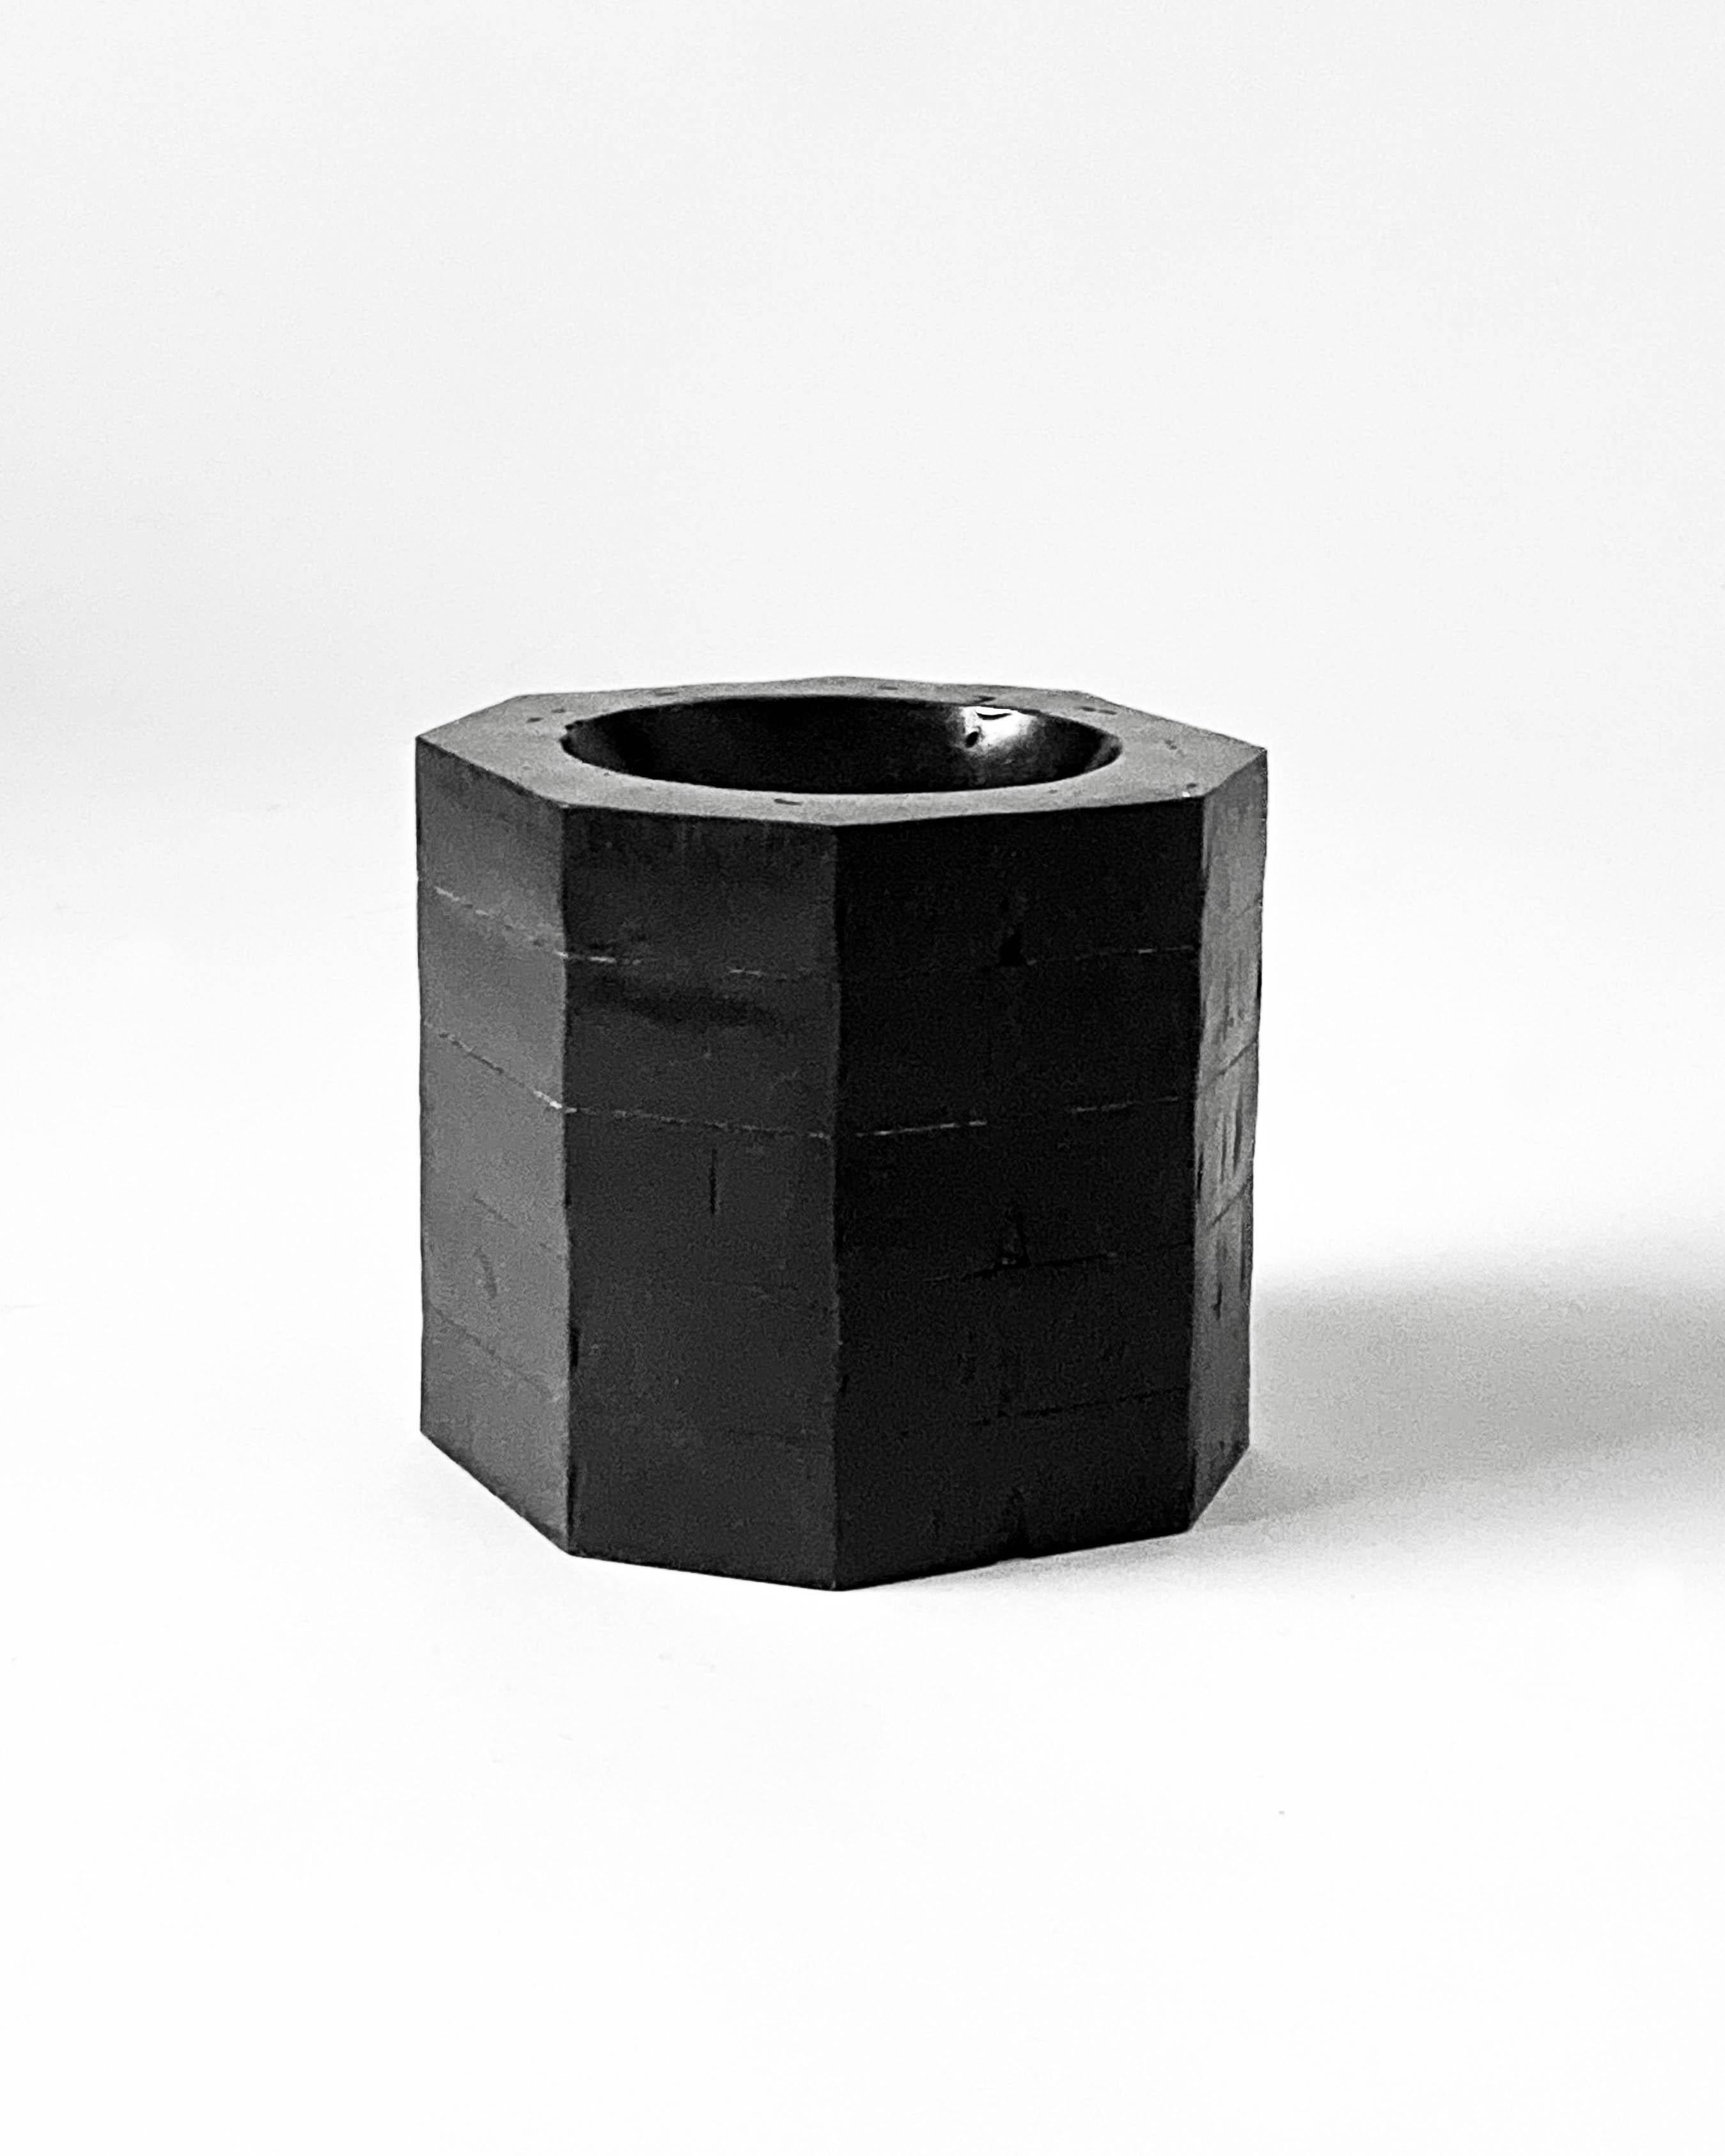 Rise Vessel by Cal Summers
Dimension:  D 10 x H 9.5 cm
Materials: Blackened Steel

Cal Summers is a British designer who makes bespoke handmade furniture and contemporary artefacts in which he challenges the boundaries of materiality and form.
Born